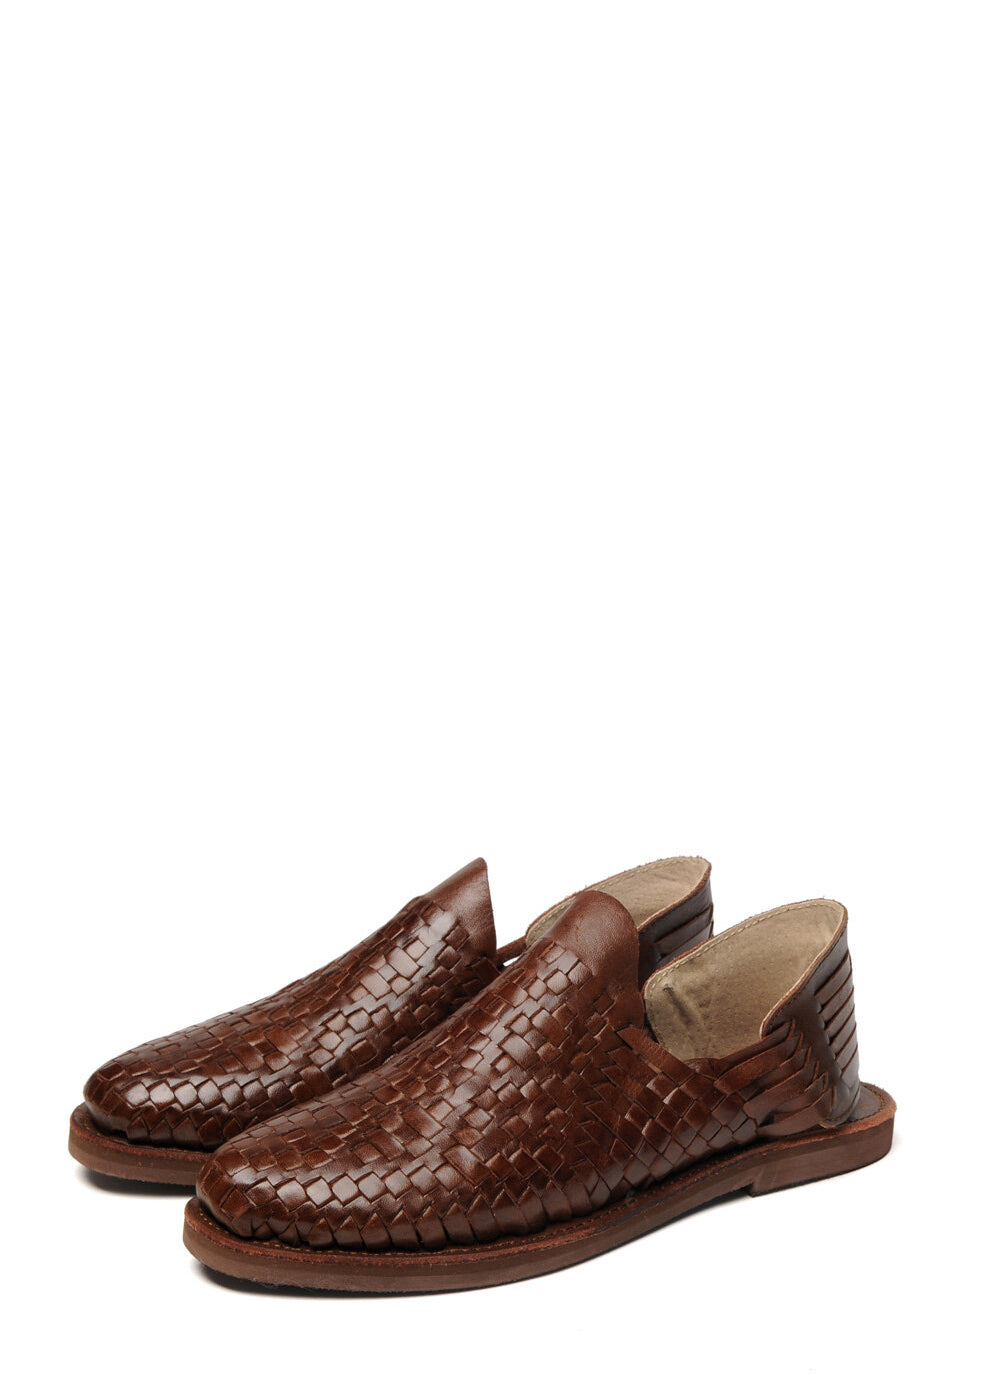 Rio Grande Leather Huarache | Slip on Vegetable Tanned Sandals | Brown 2